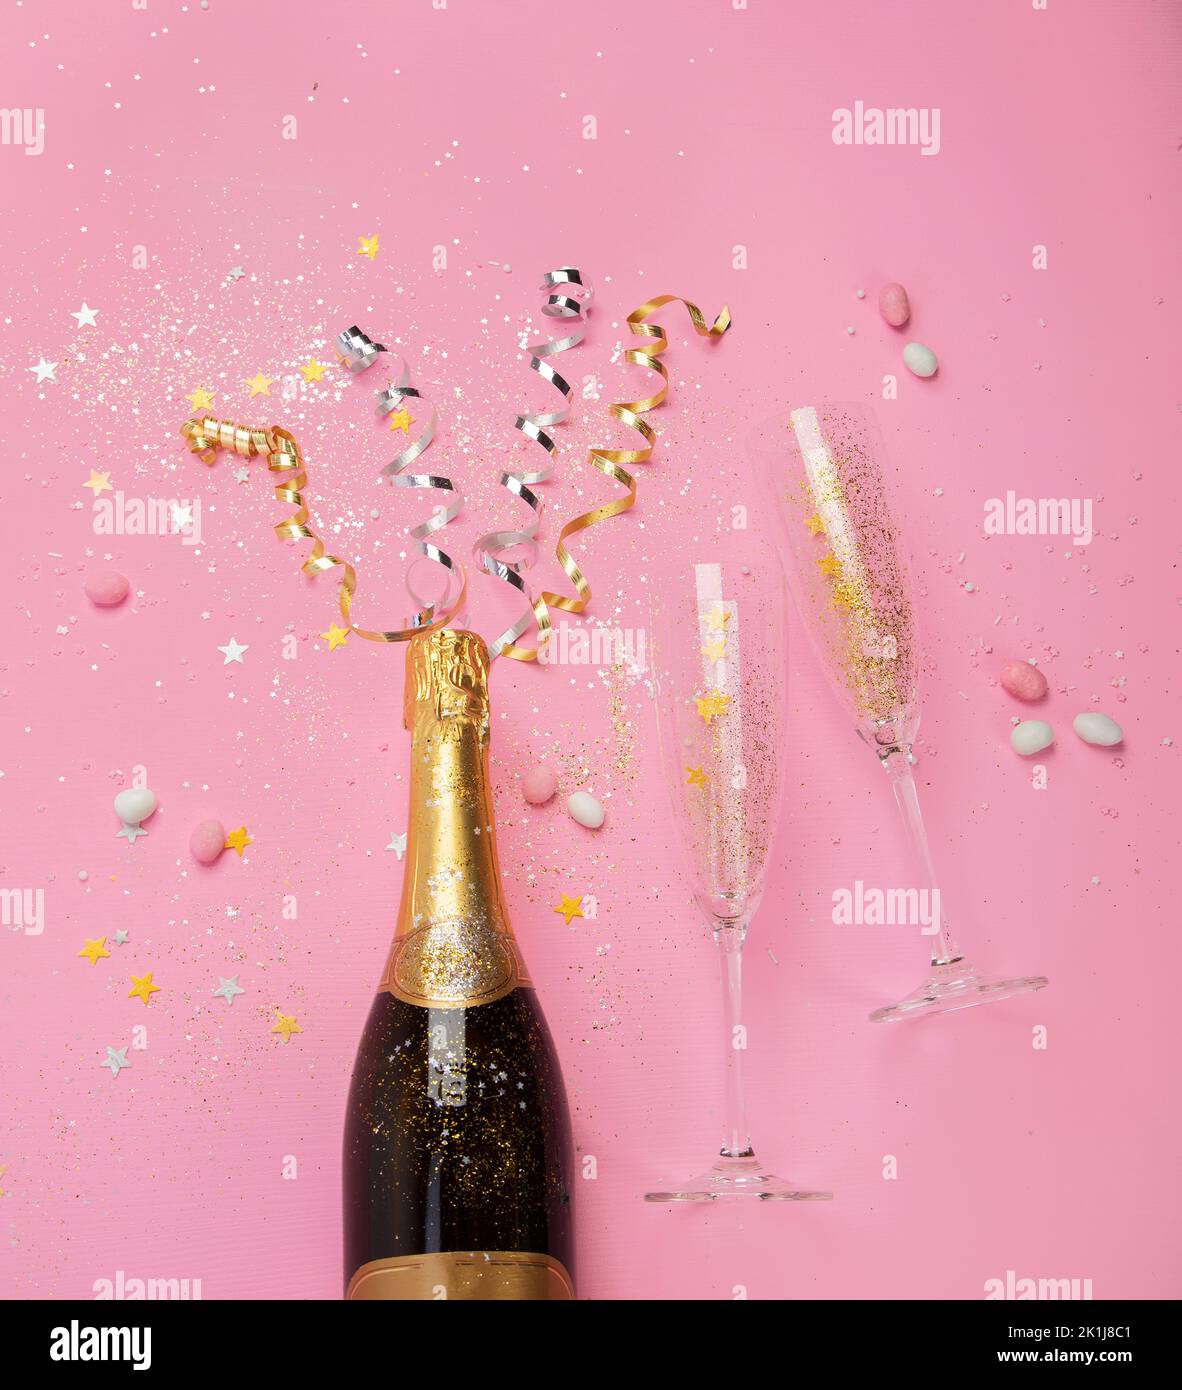 Champagne bottle with confetti on pink background. Holiday decoration and party streamers on gold festive. Creative concept. Top view Stock Photo